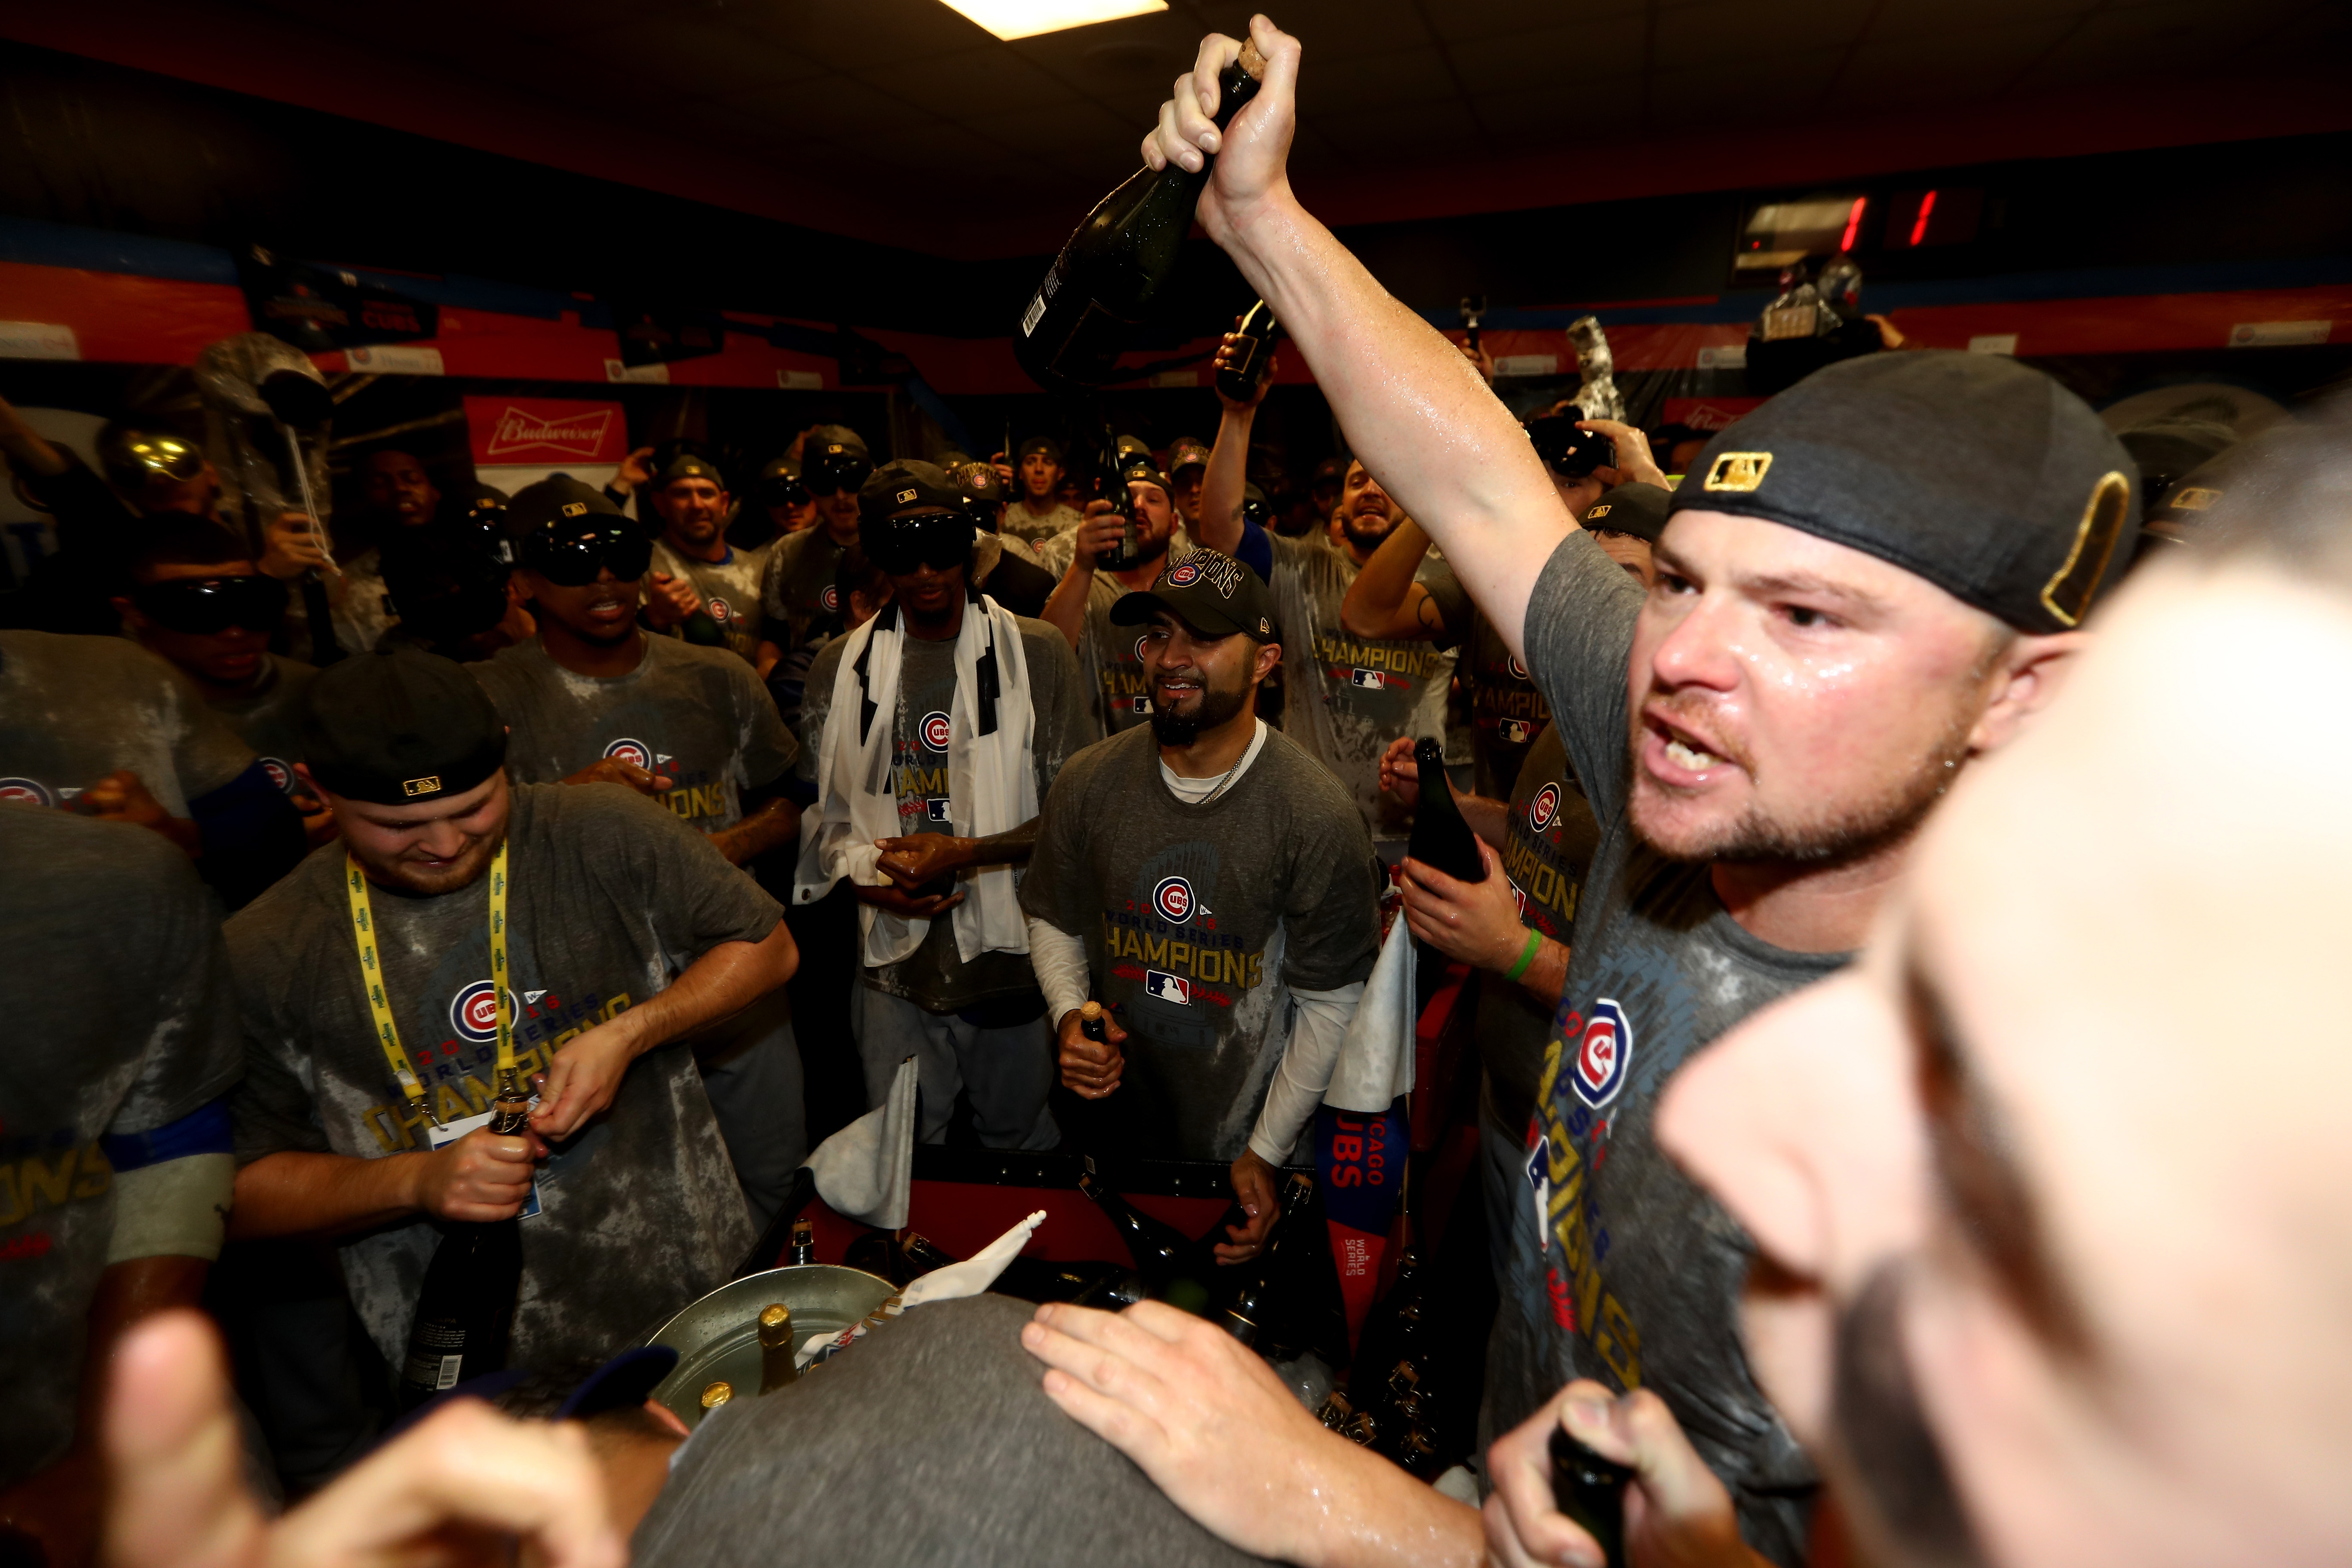 Cubs free agent Jon Lester buying beers for fans at Chicago bars